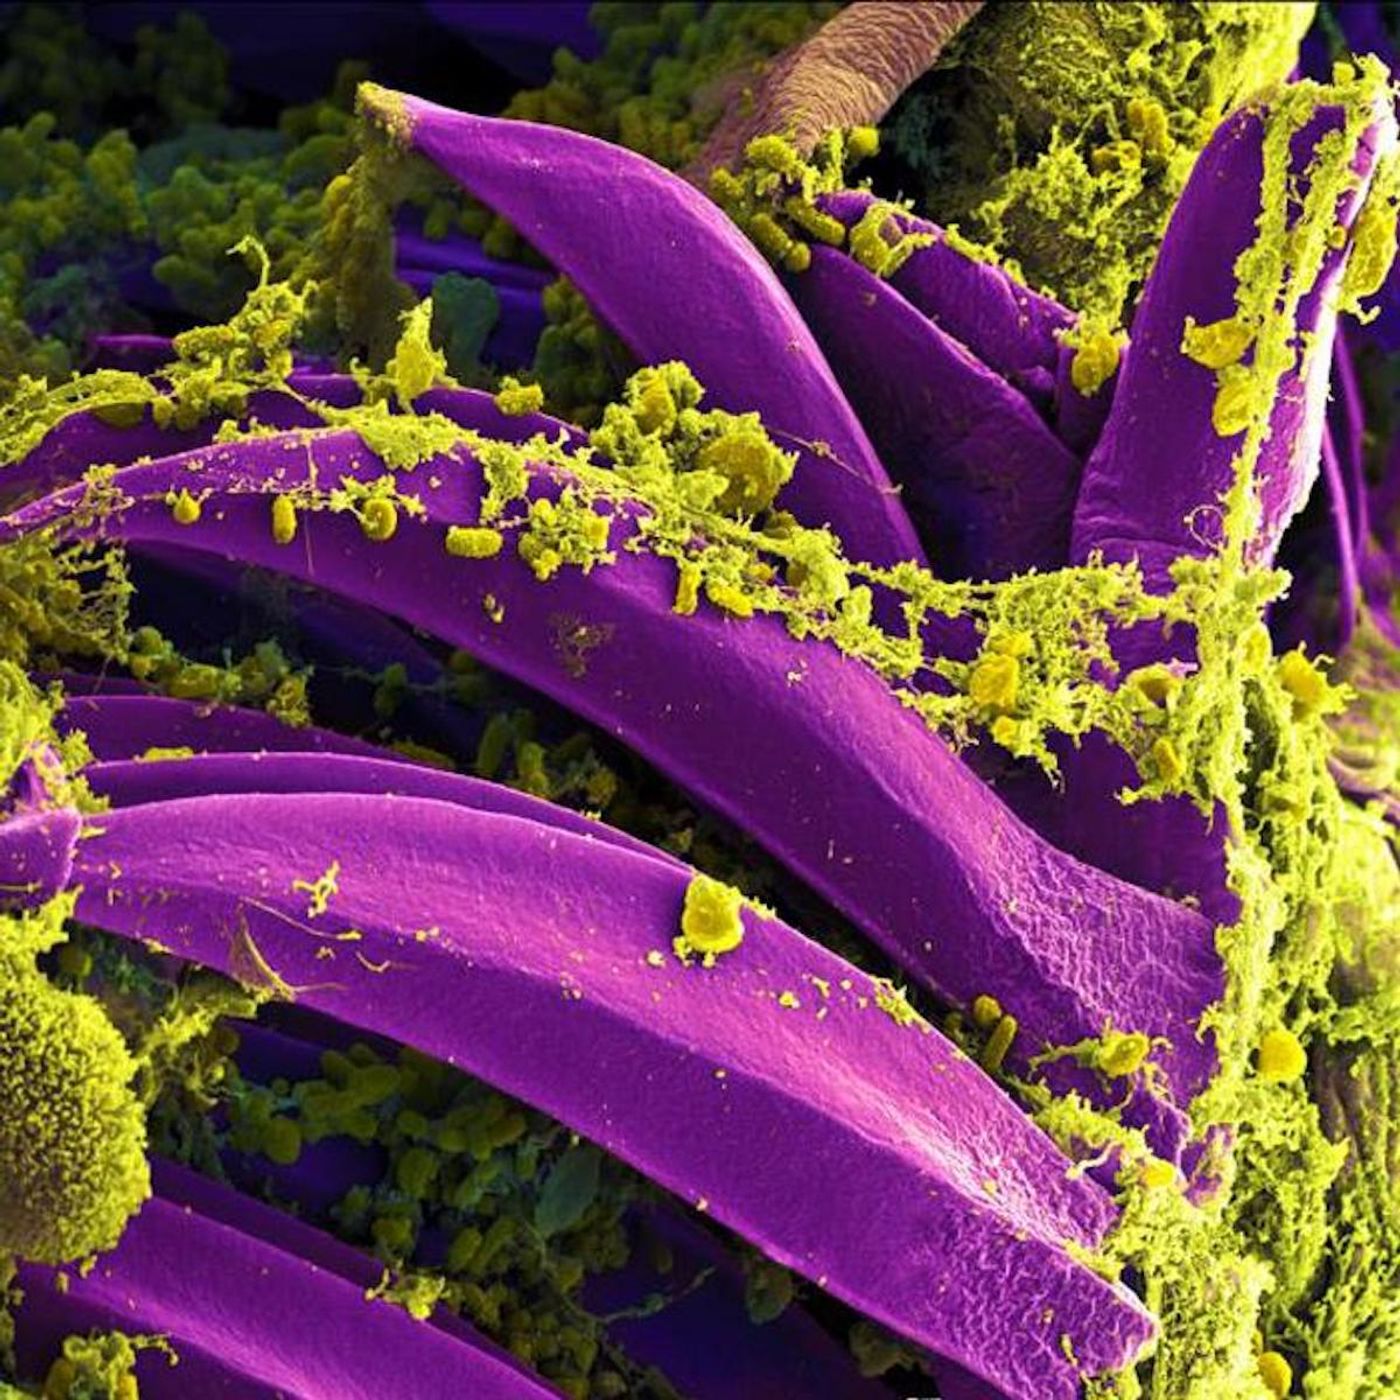 By National Institute of Allergy and Infectious Diseases (NIAID) this digitally colorized SEM image depicts (yellow) Yersinia pestis bacteria on the interior digestive system of a Xenopsylla cheopis / Credit: National Institute of Allergy and Infectious Diseases (NIAID)